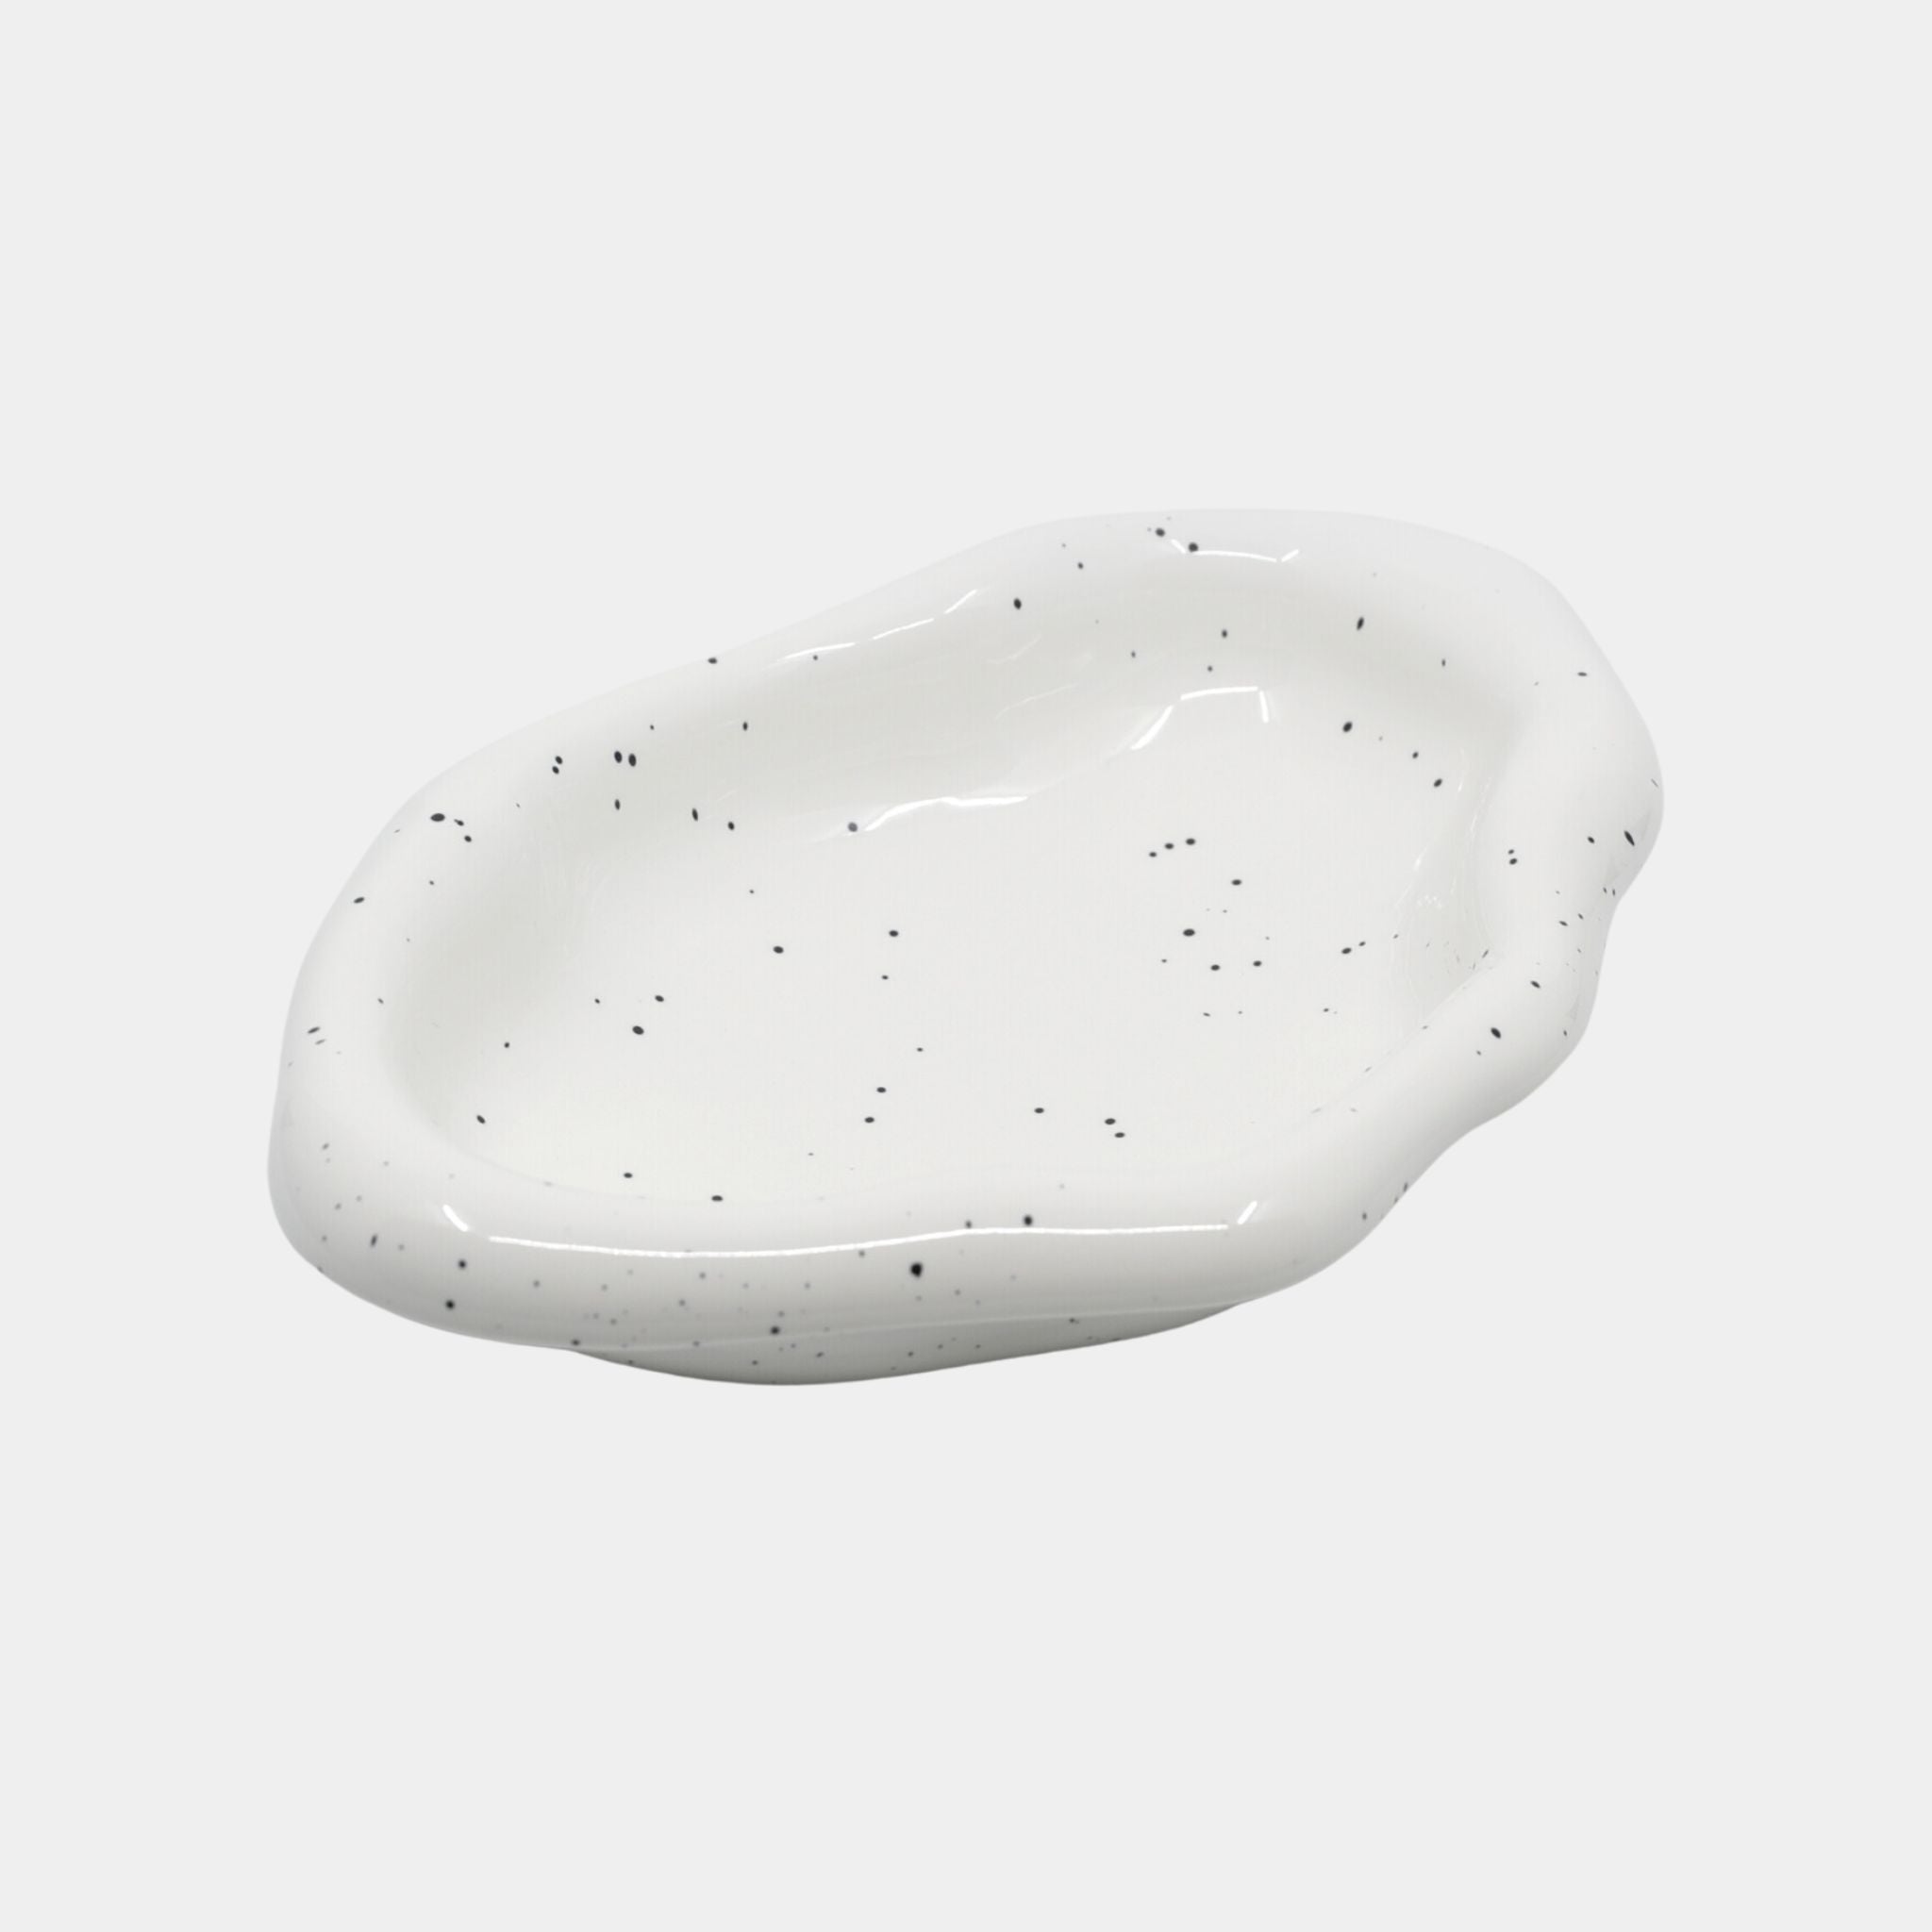 Warbled Ceramic - Large Speckled Bowl - The Feelter